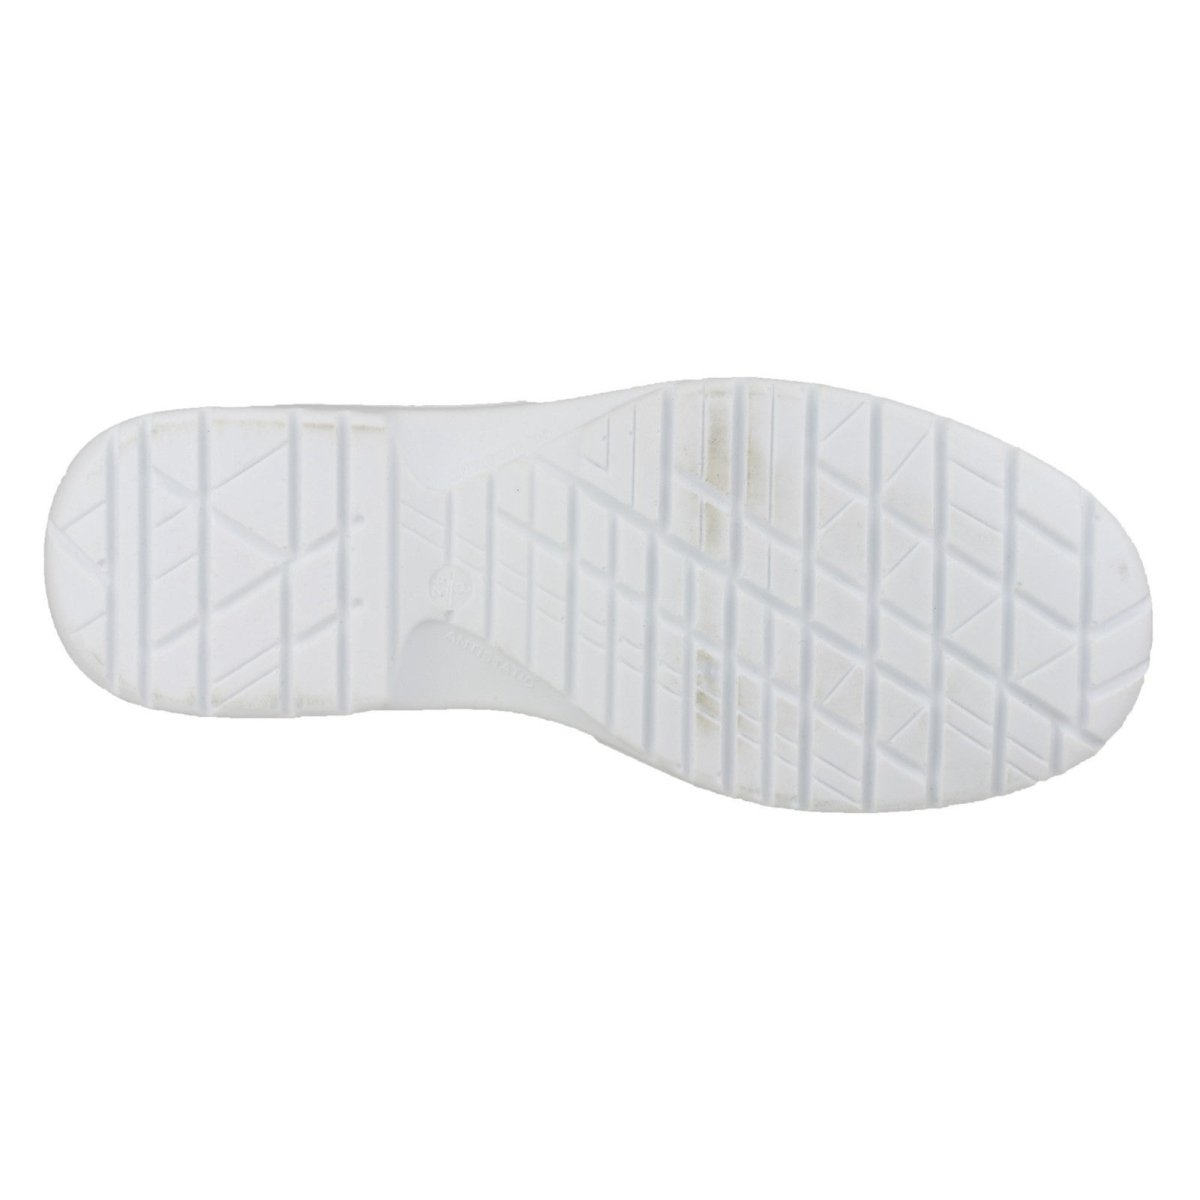 Amblers FS511 White Composite Toe Safety Shoes - Shoe Store Direct